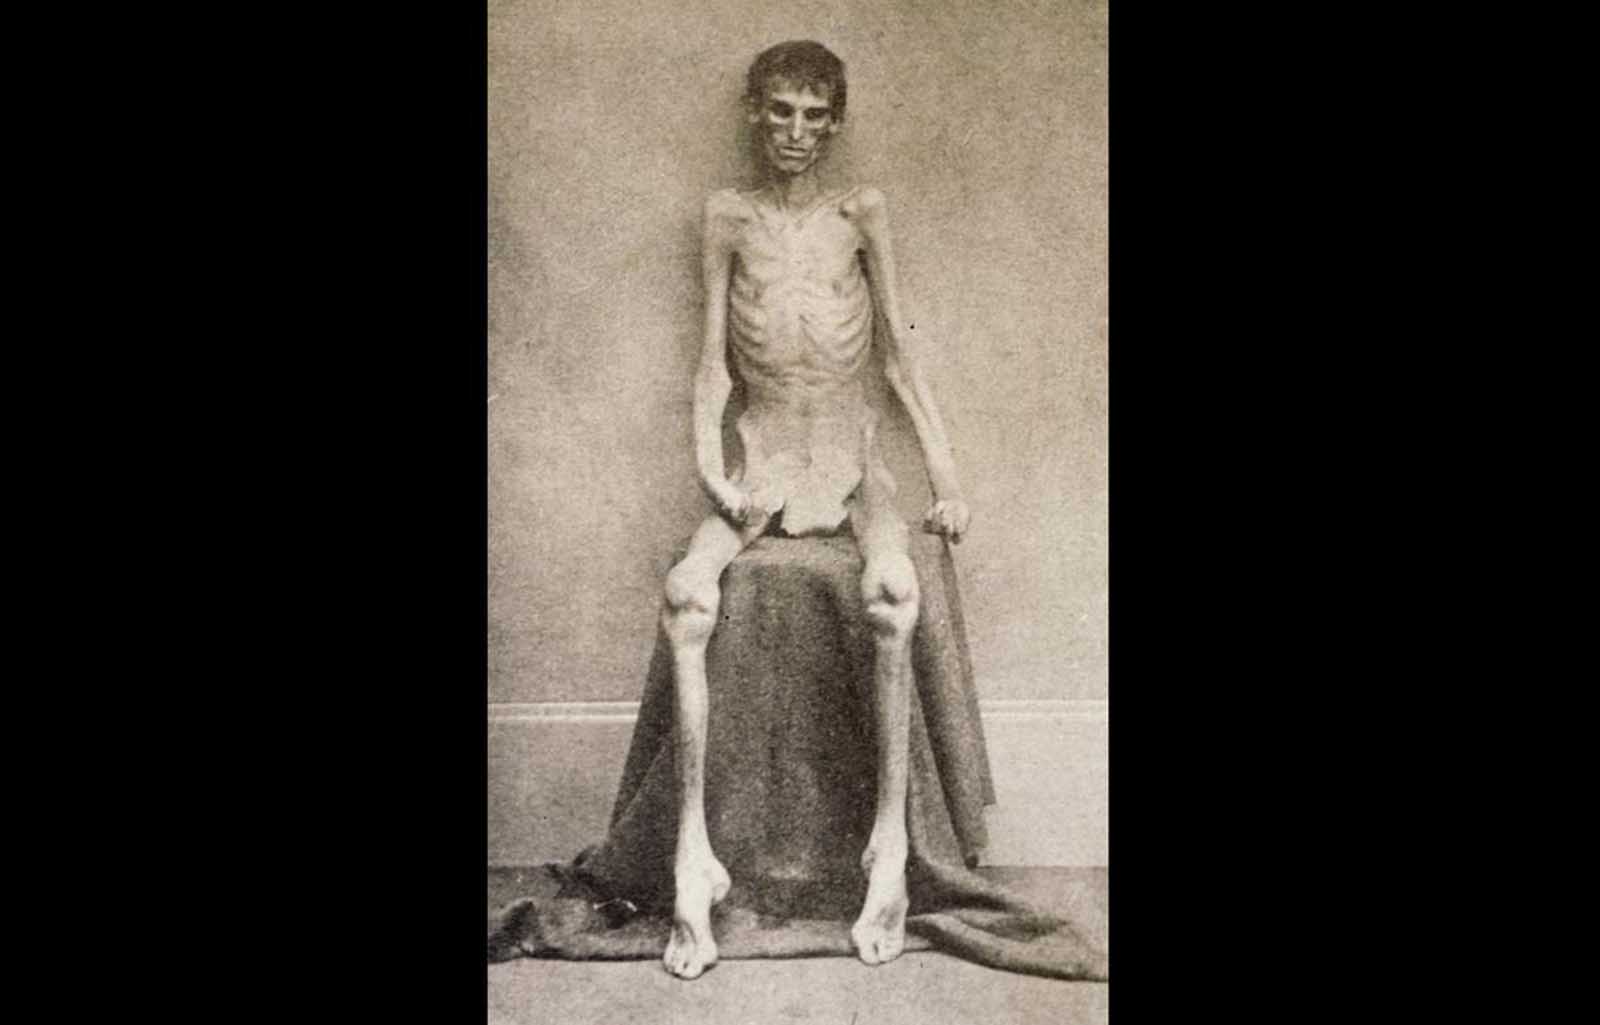 A nearly-starved Union soldier who survived imprisonment in the notorious Confederate prison in Andersonville, Georgia.